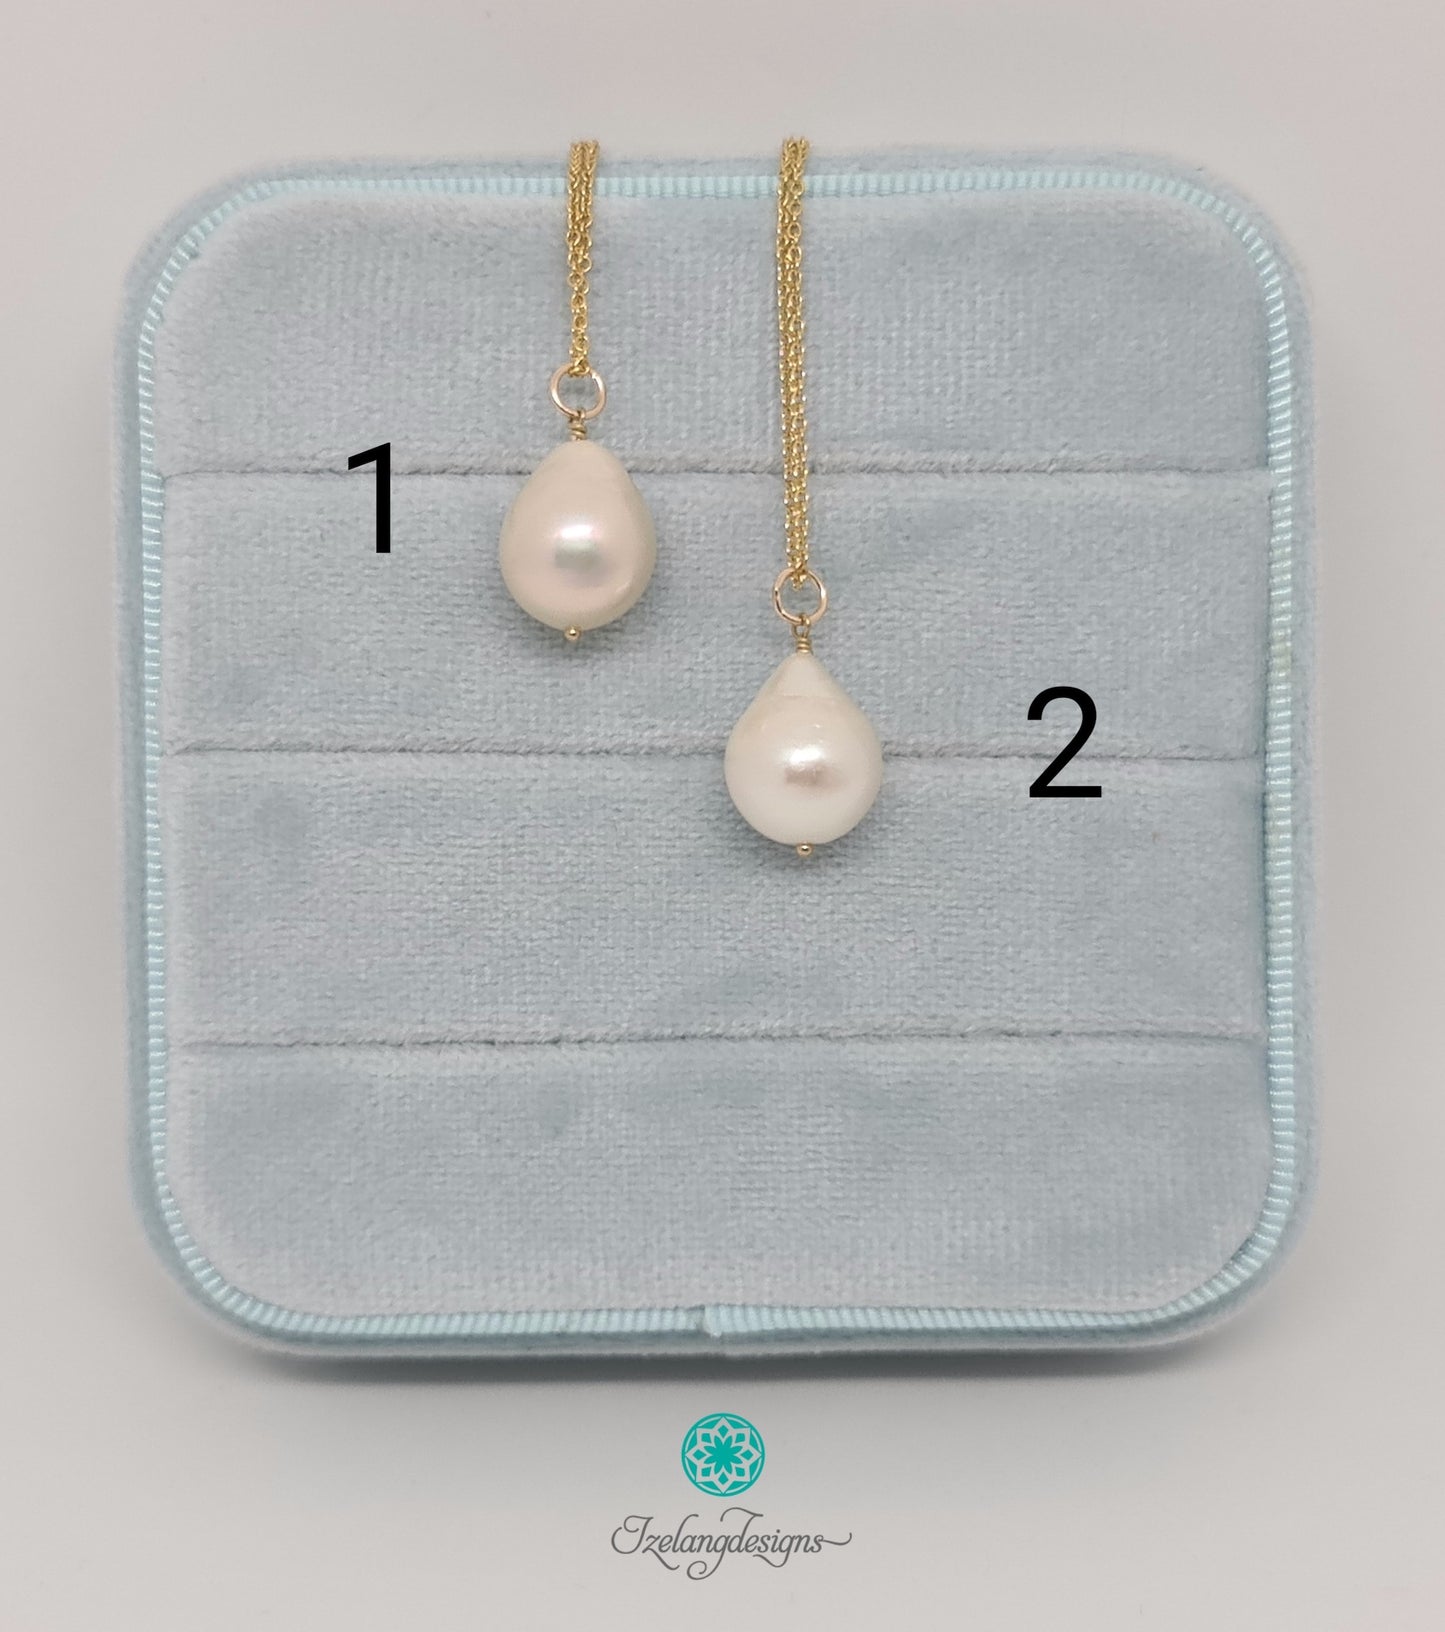 11-12mm White Freshwater Pearl Baroque Through Drilled Pendant Necklace with 14KGF Chain-NE318